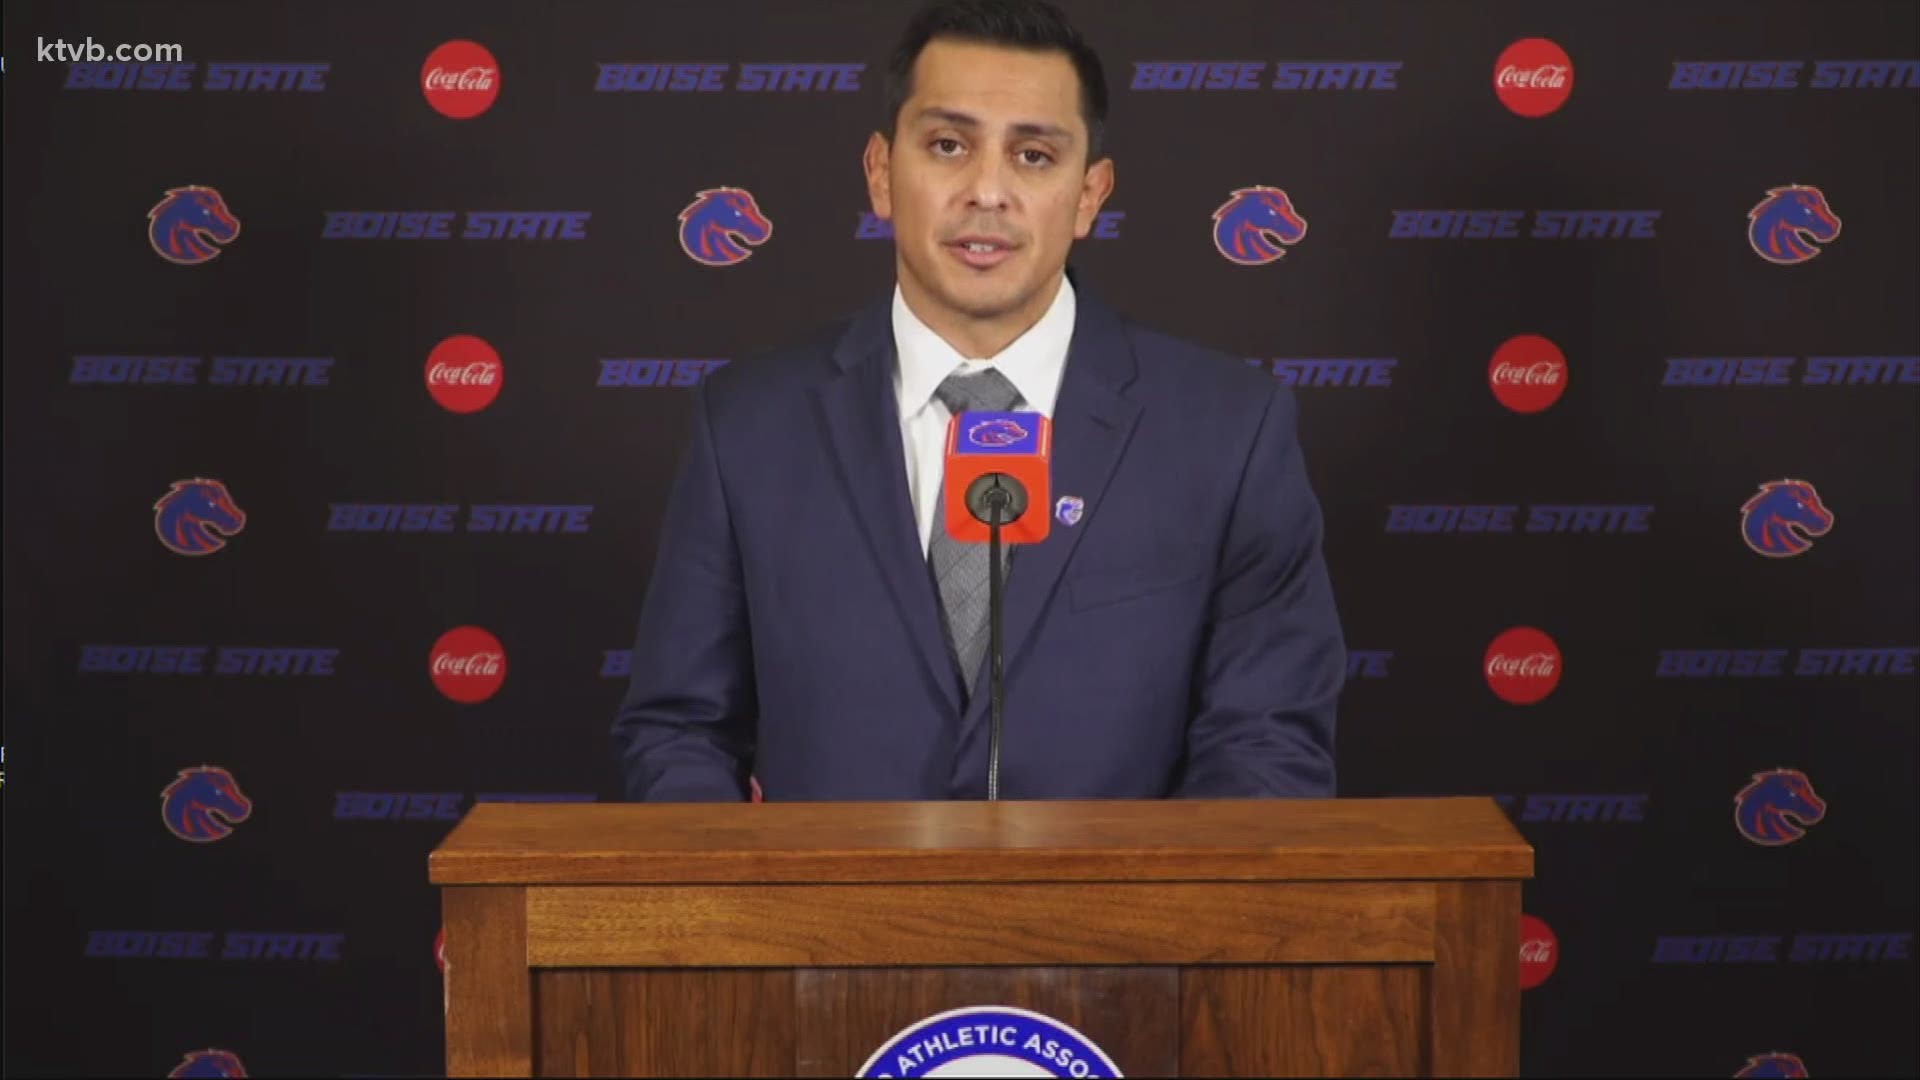 On Sunday, Jan. 10, Boise State held a press conference to welcome Andy Avalos as the new head coach of the Broncos' football program.